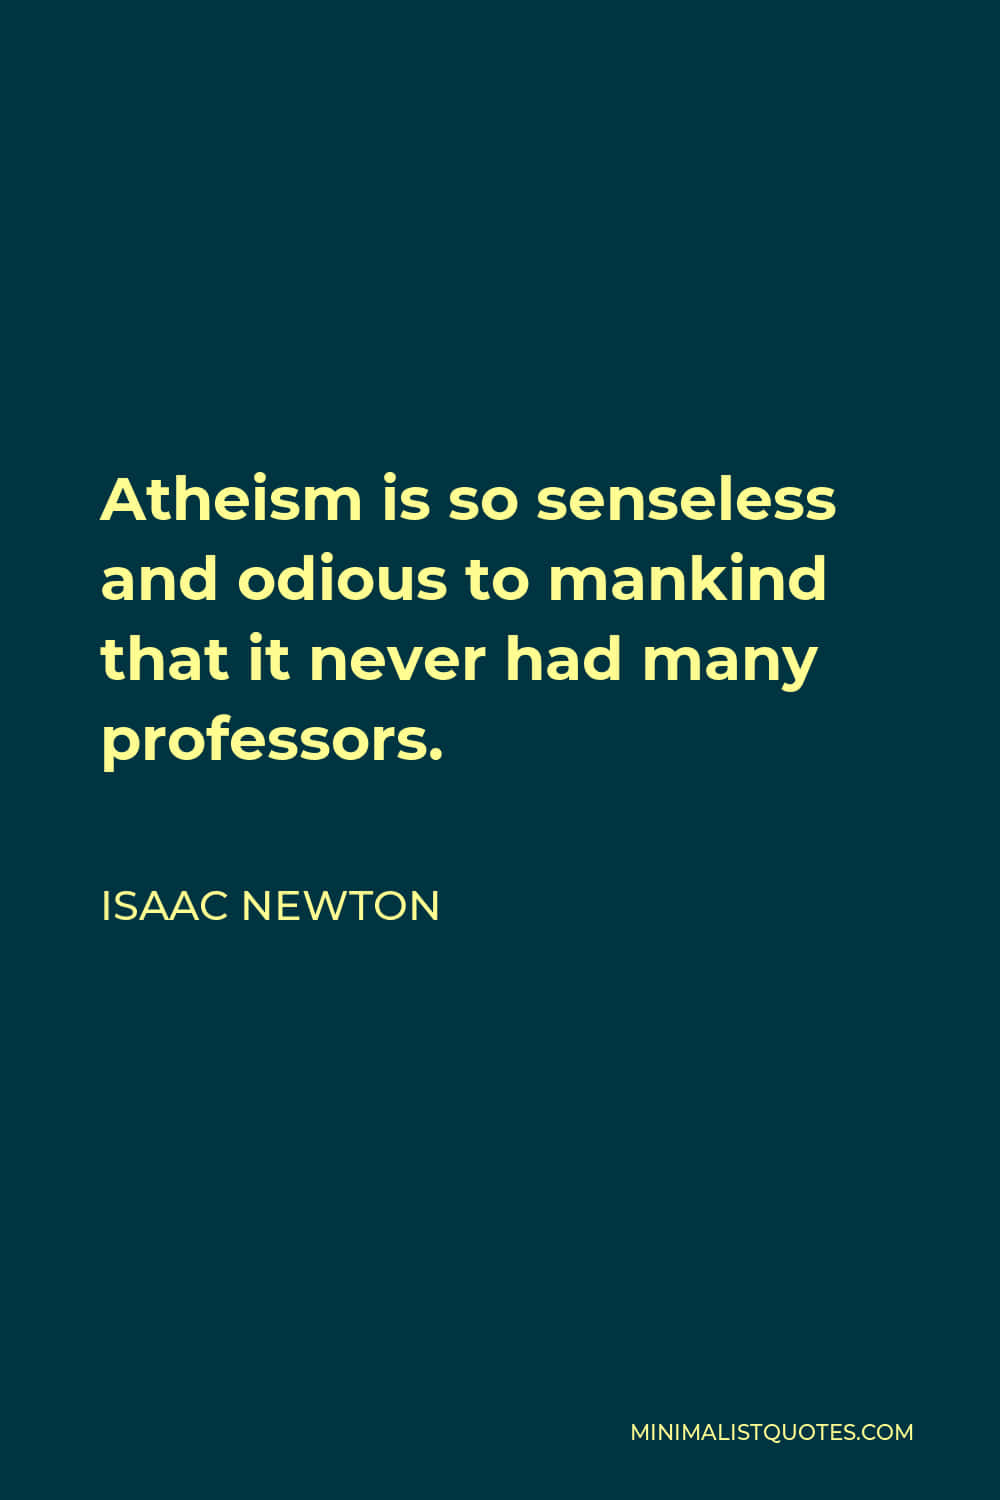 Odious Isaac Newton Atheism Quote Wallpaper